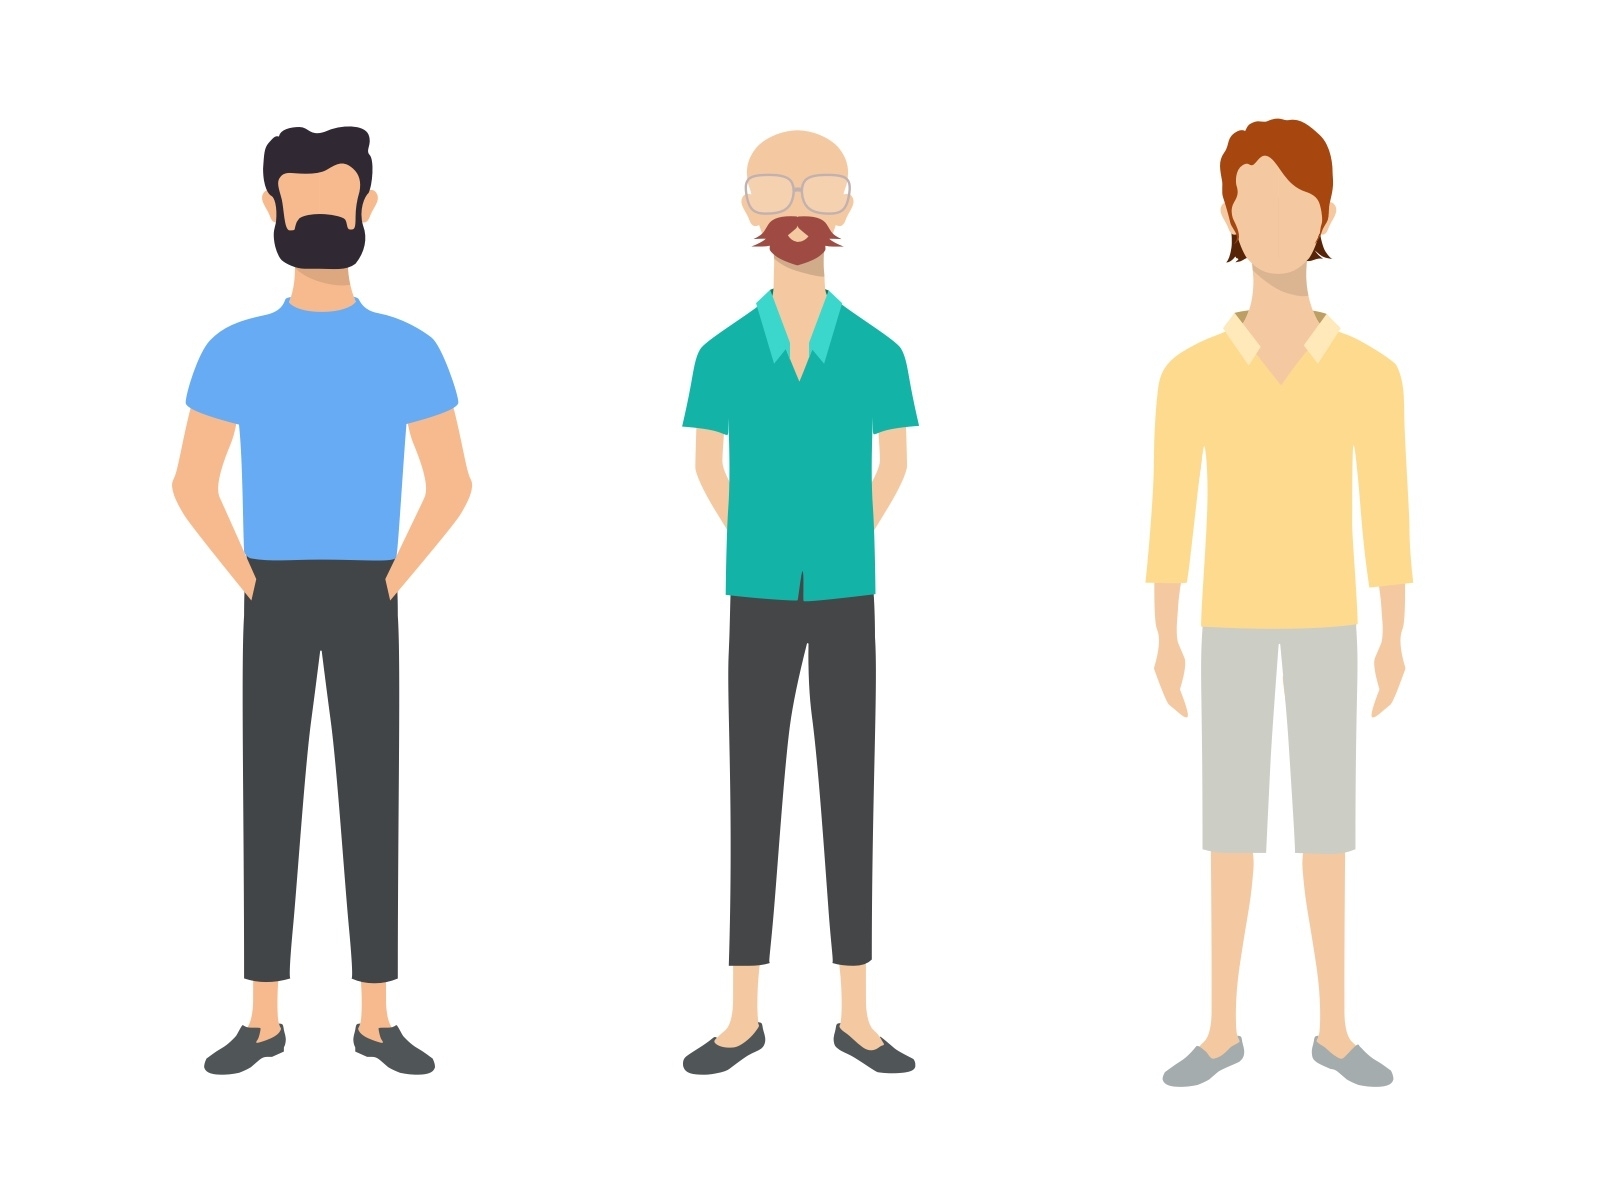 3 Fashionable Men by Gonneo on Dribbble